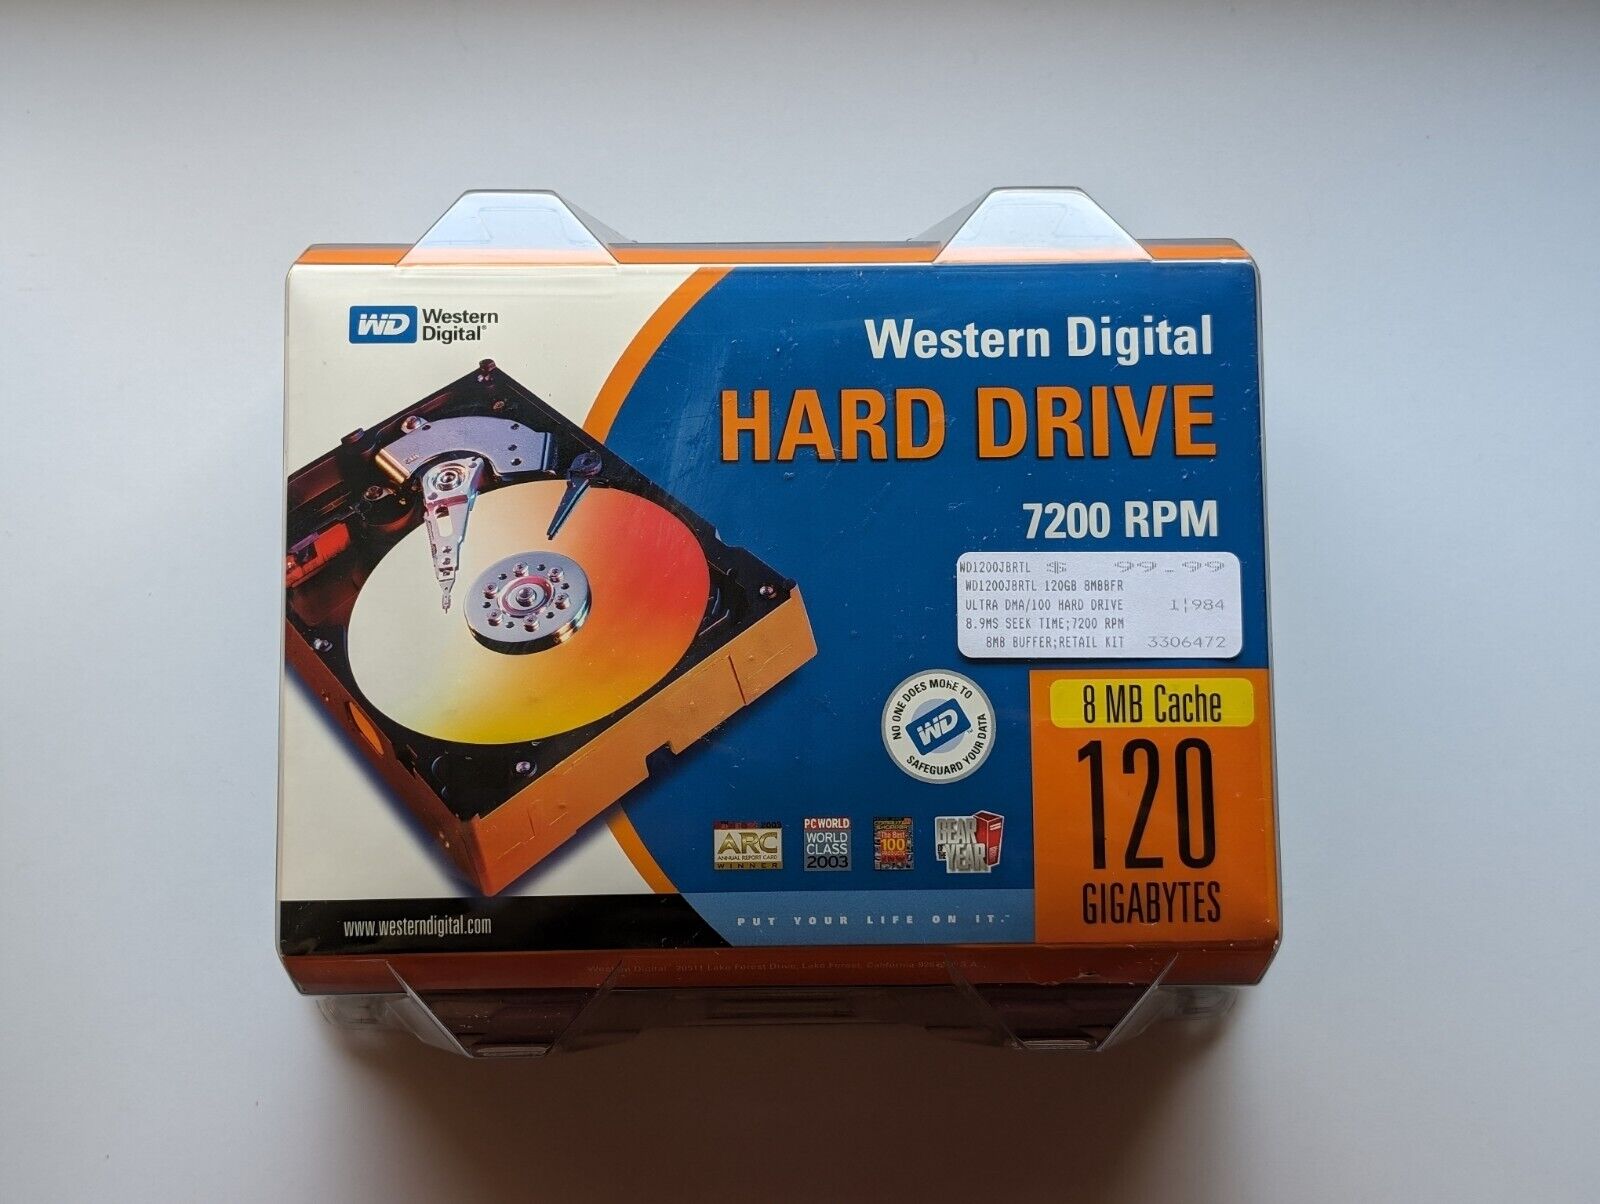 Western Digital 120 GB EIDE Hard Drive with 8MB Cache New In Original Packaging 